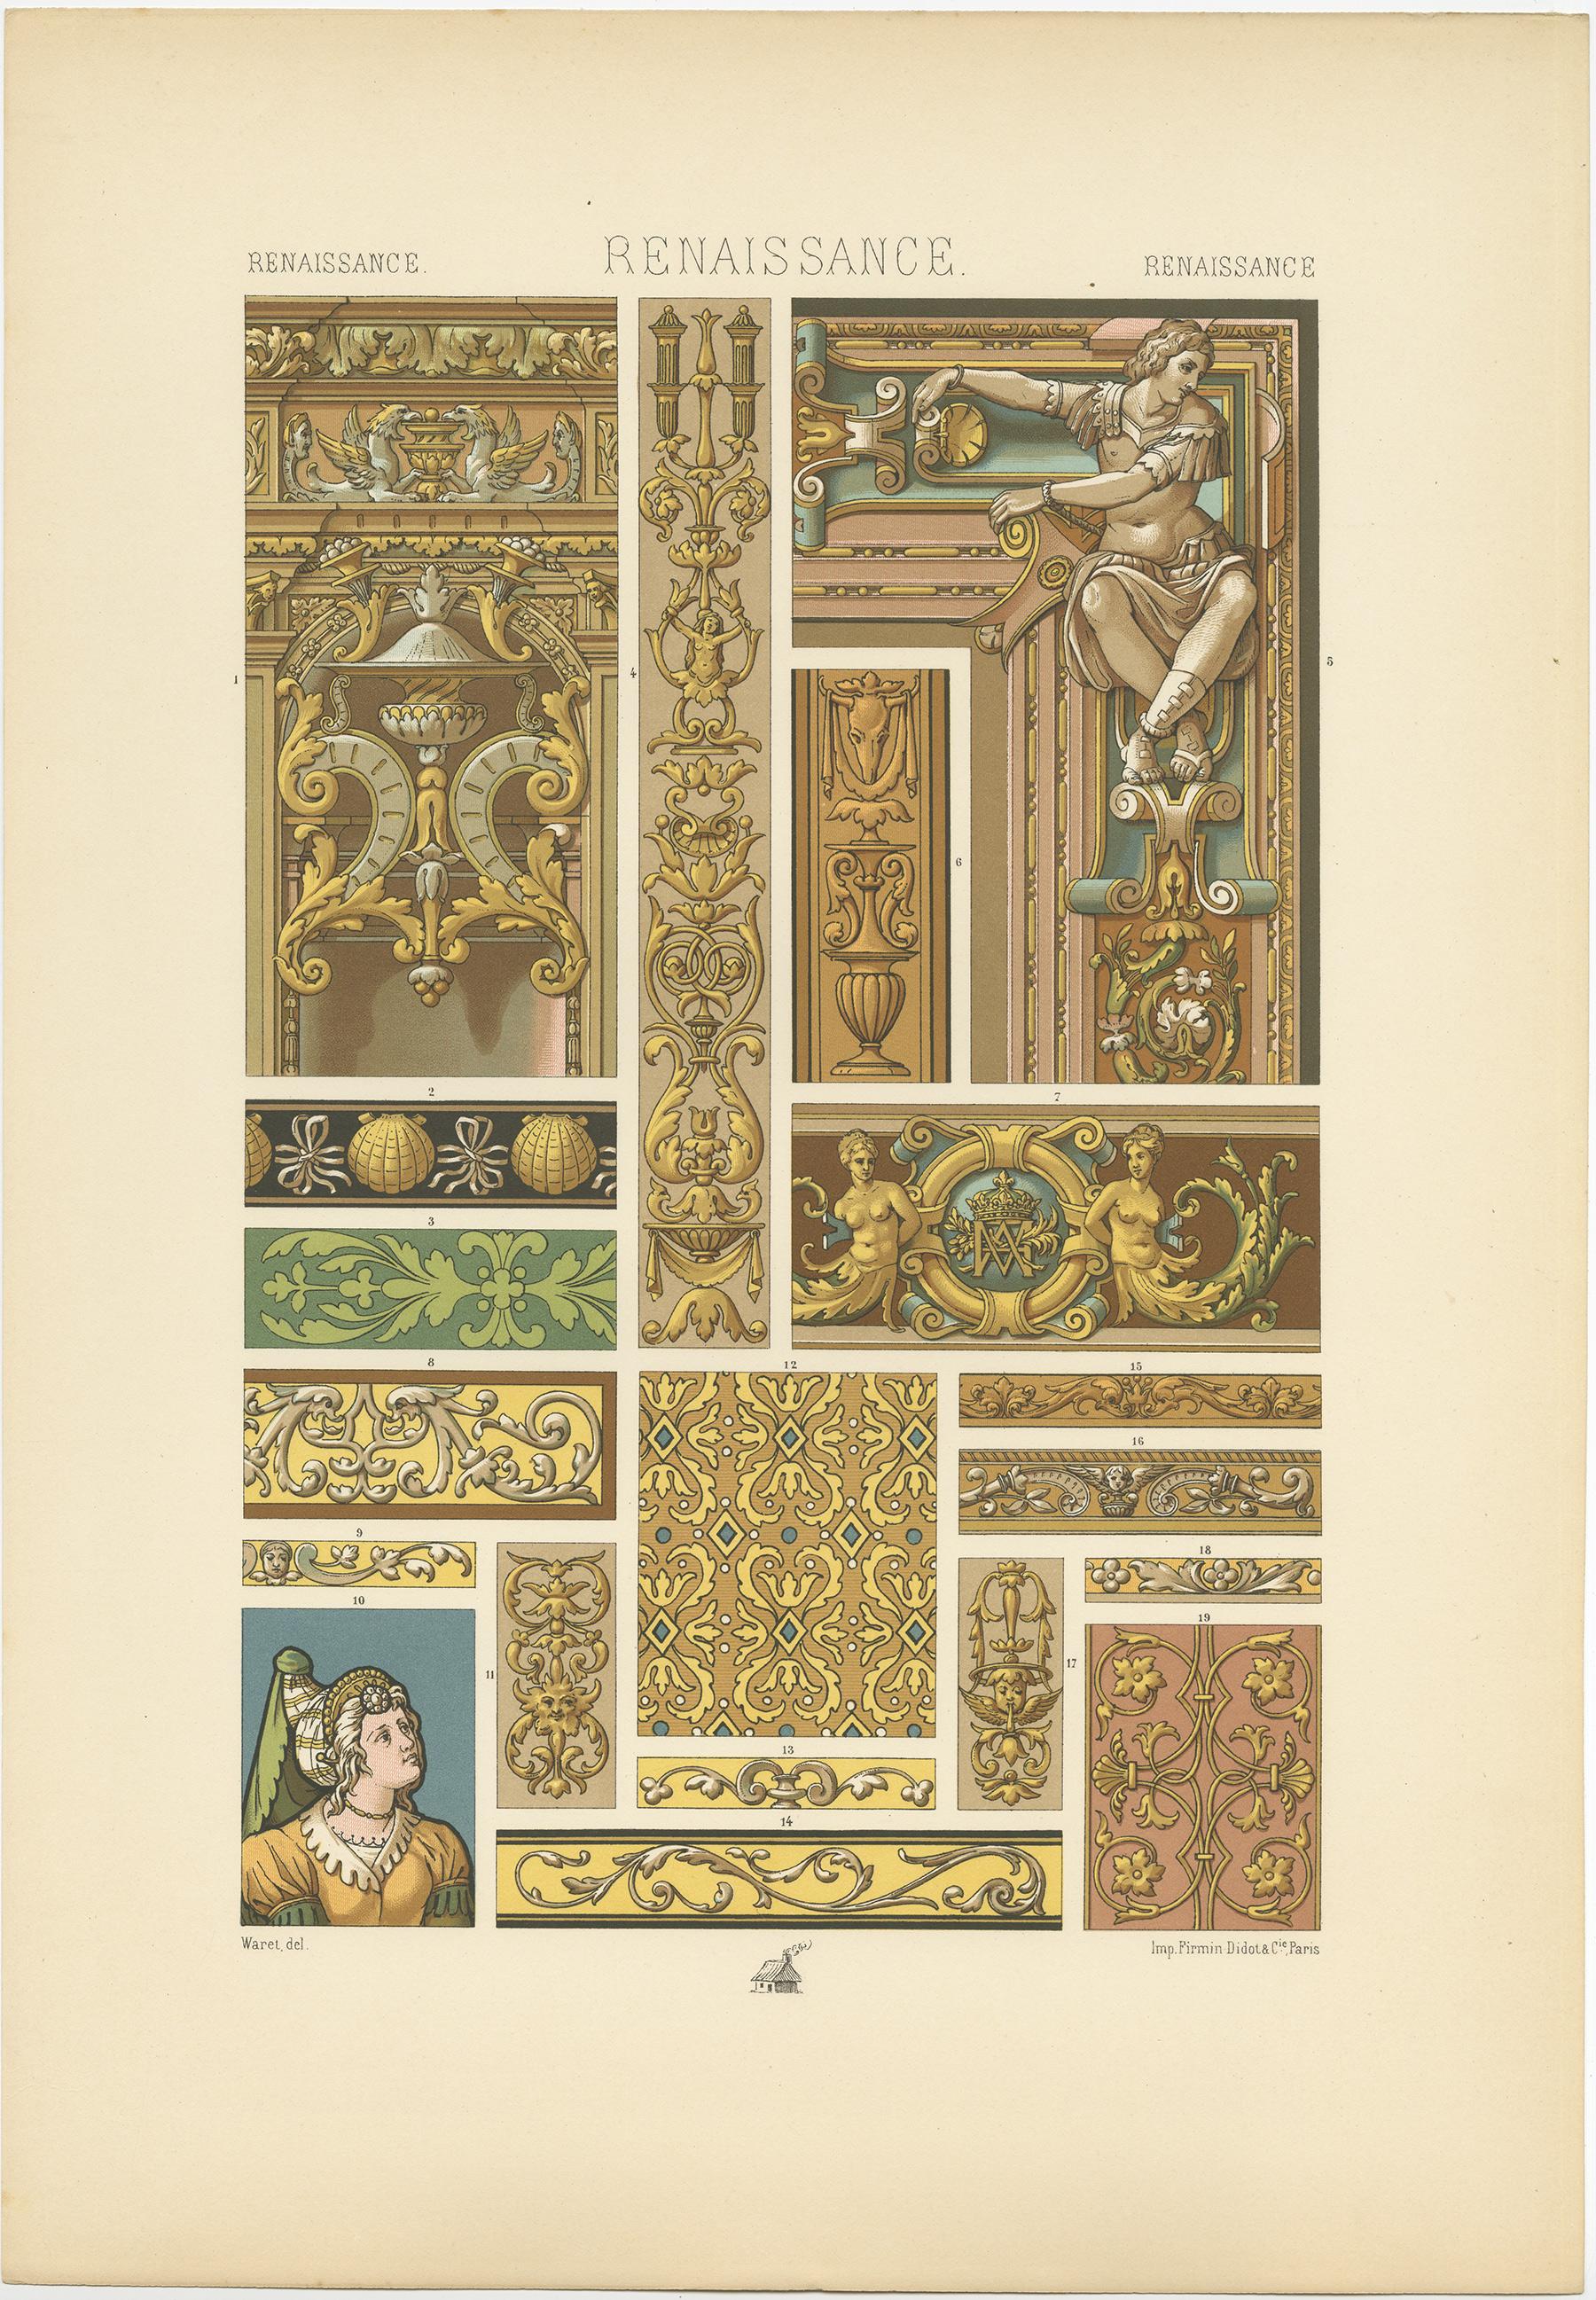 Antique print titled 'Renaissance - Renaissance - Renaissance'. Chromolithograph of from stained glass, tapestries and sculpture, France 16th century ornaments. This print originates from 'l'Ornement Polychrome' by Auguste Racinet. Published circa